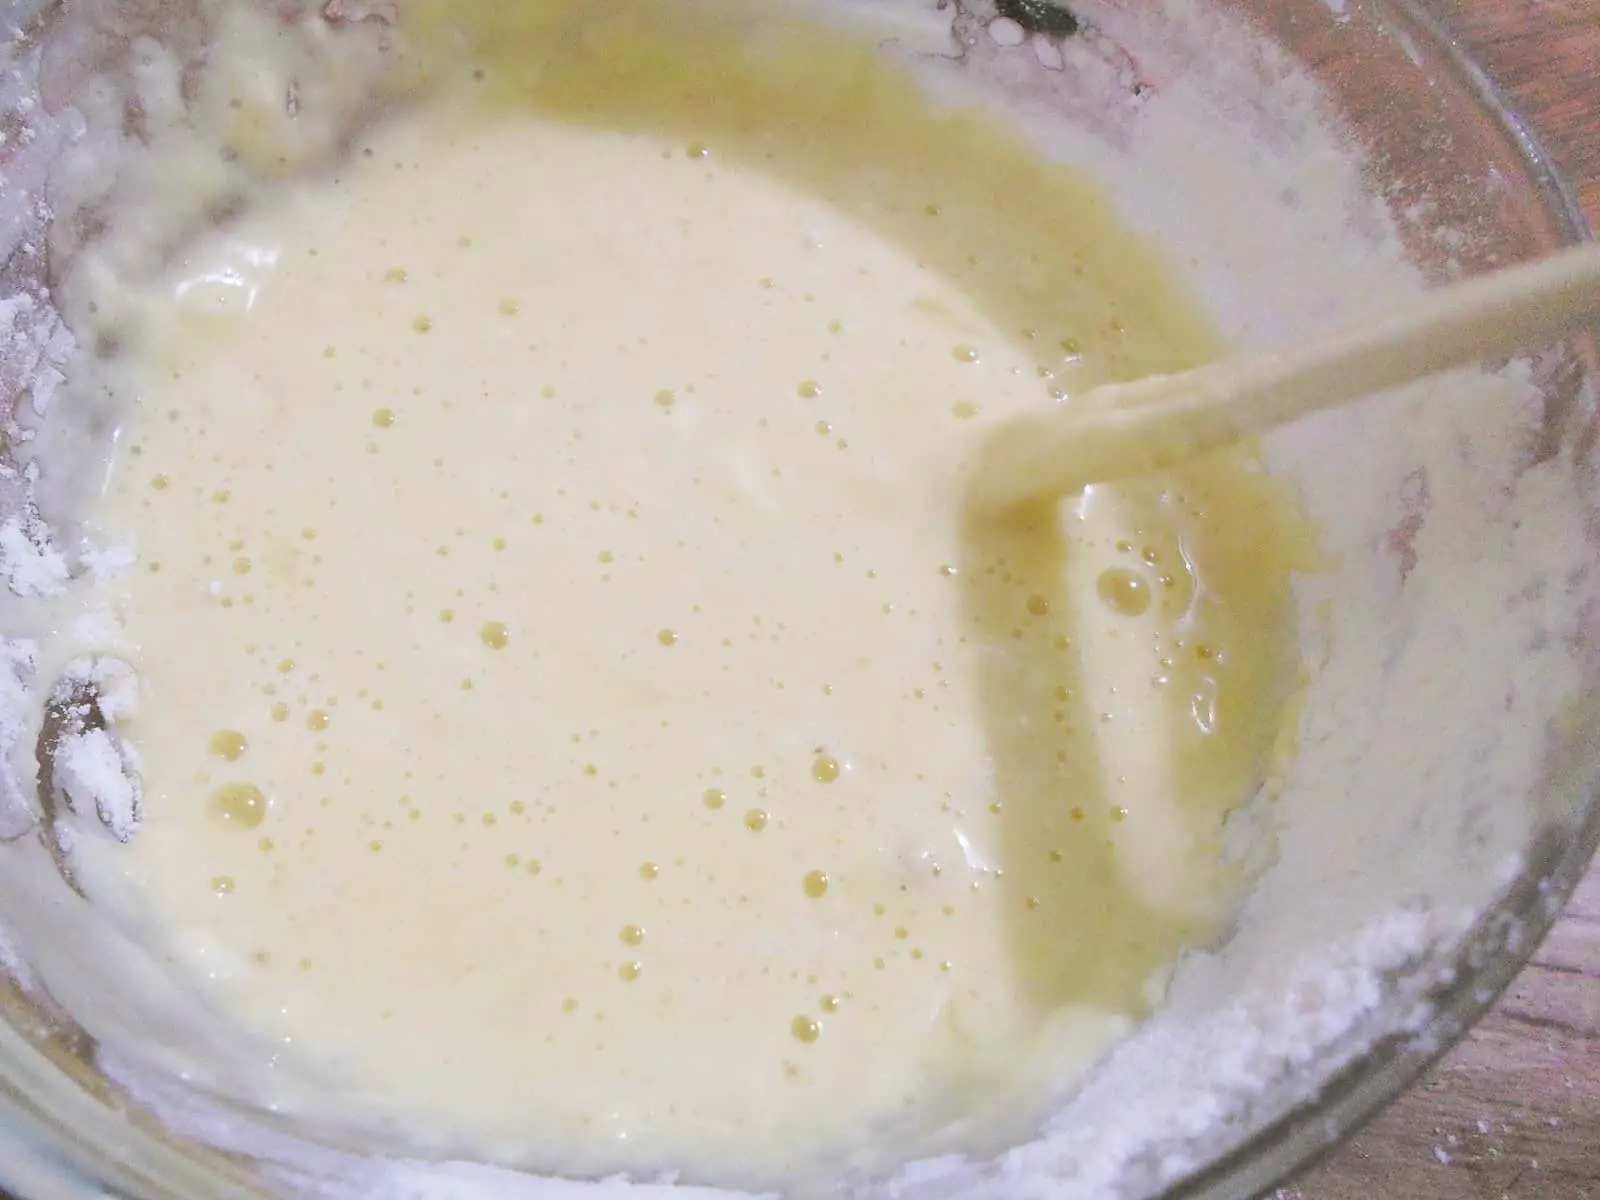 The batter should be smooth but not over-mixed to prevent the pancake from becoming tough and rubbery.